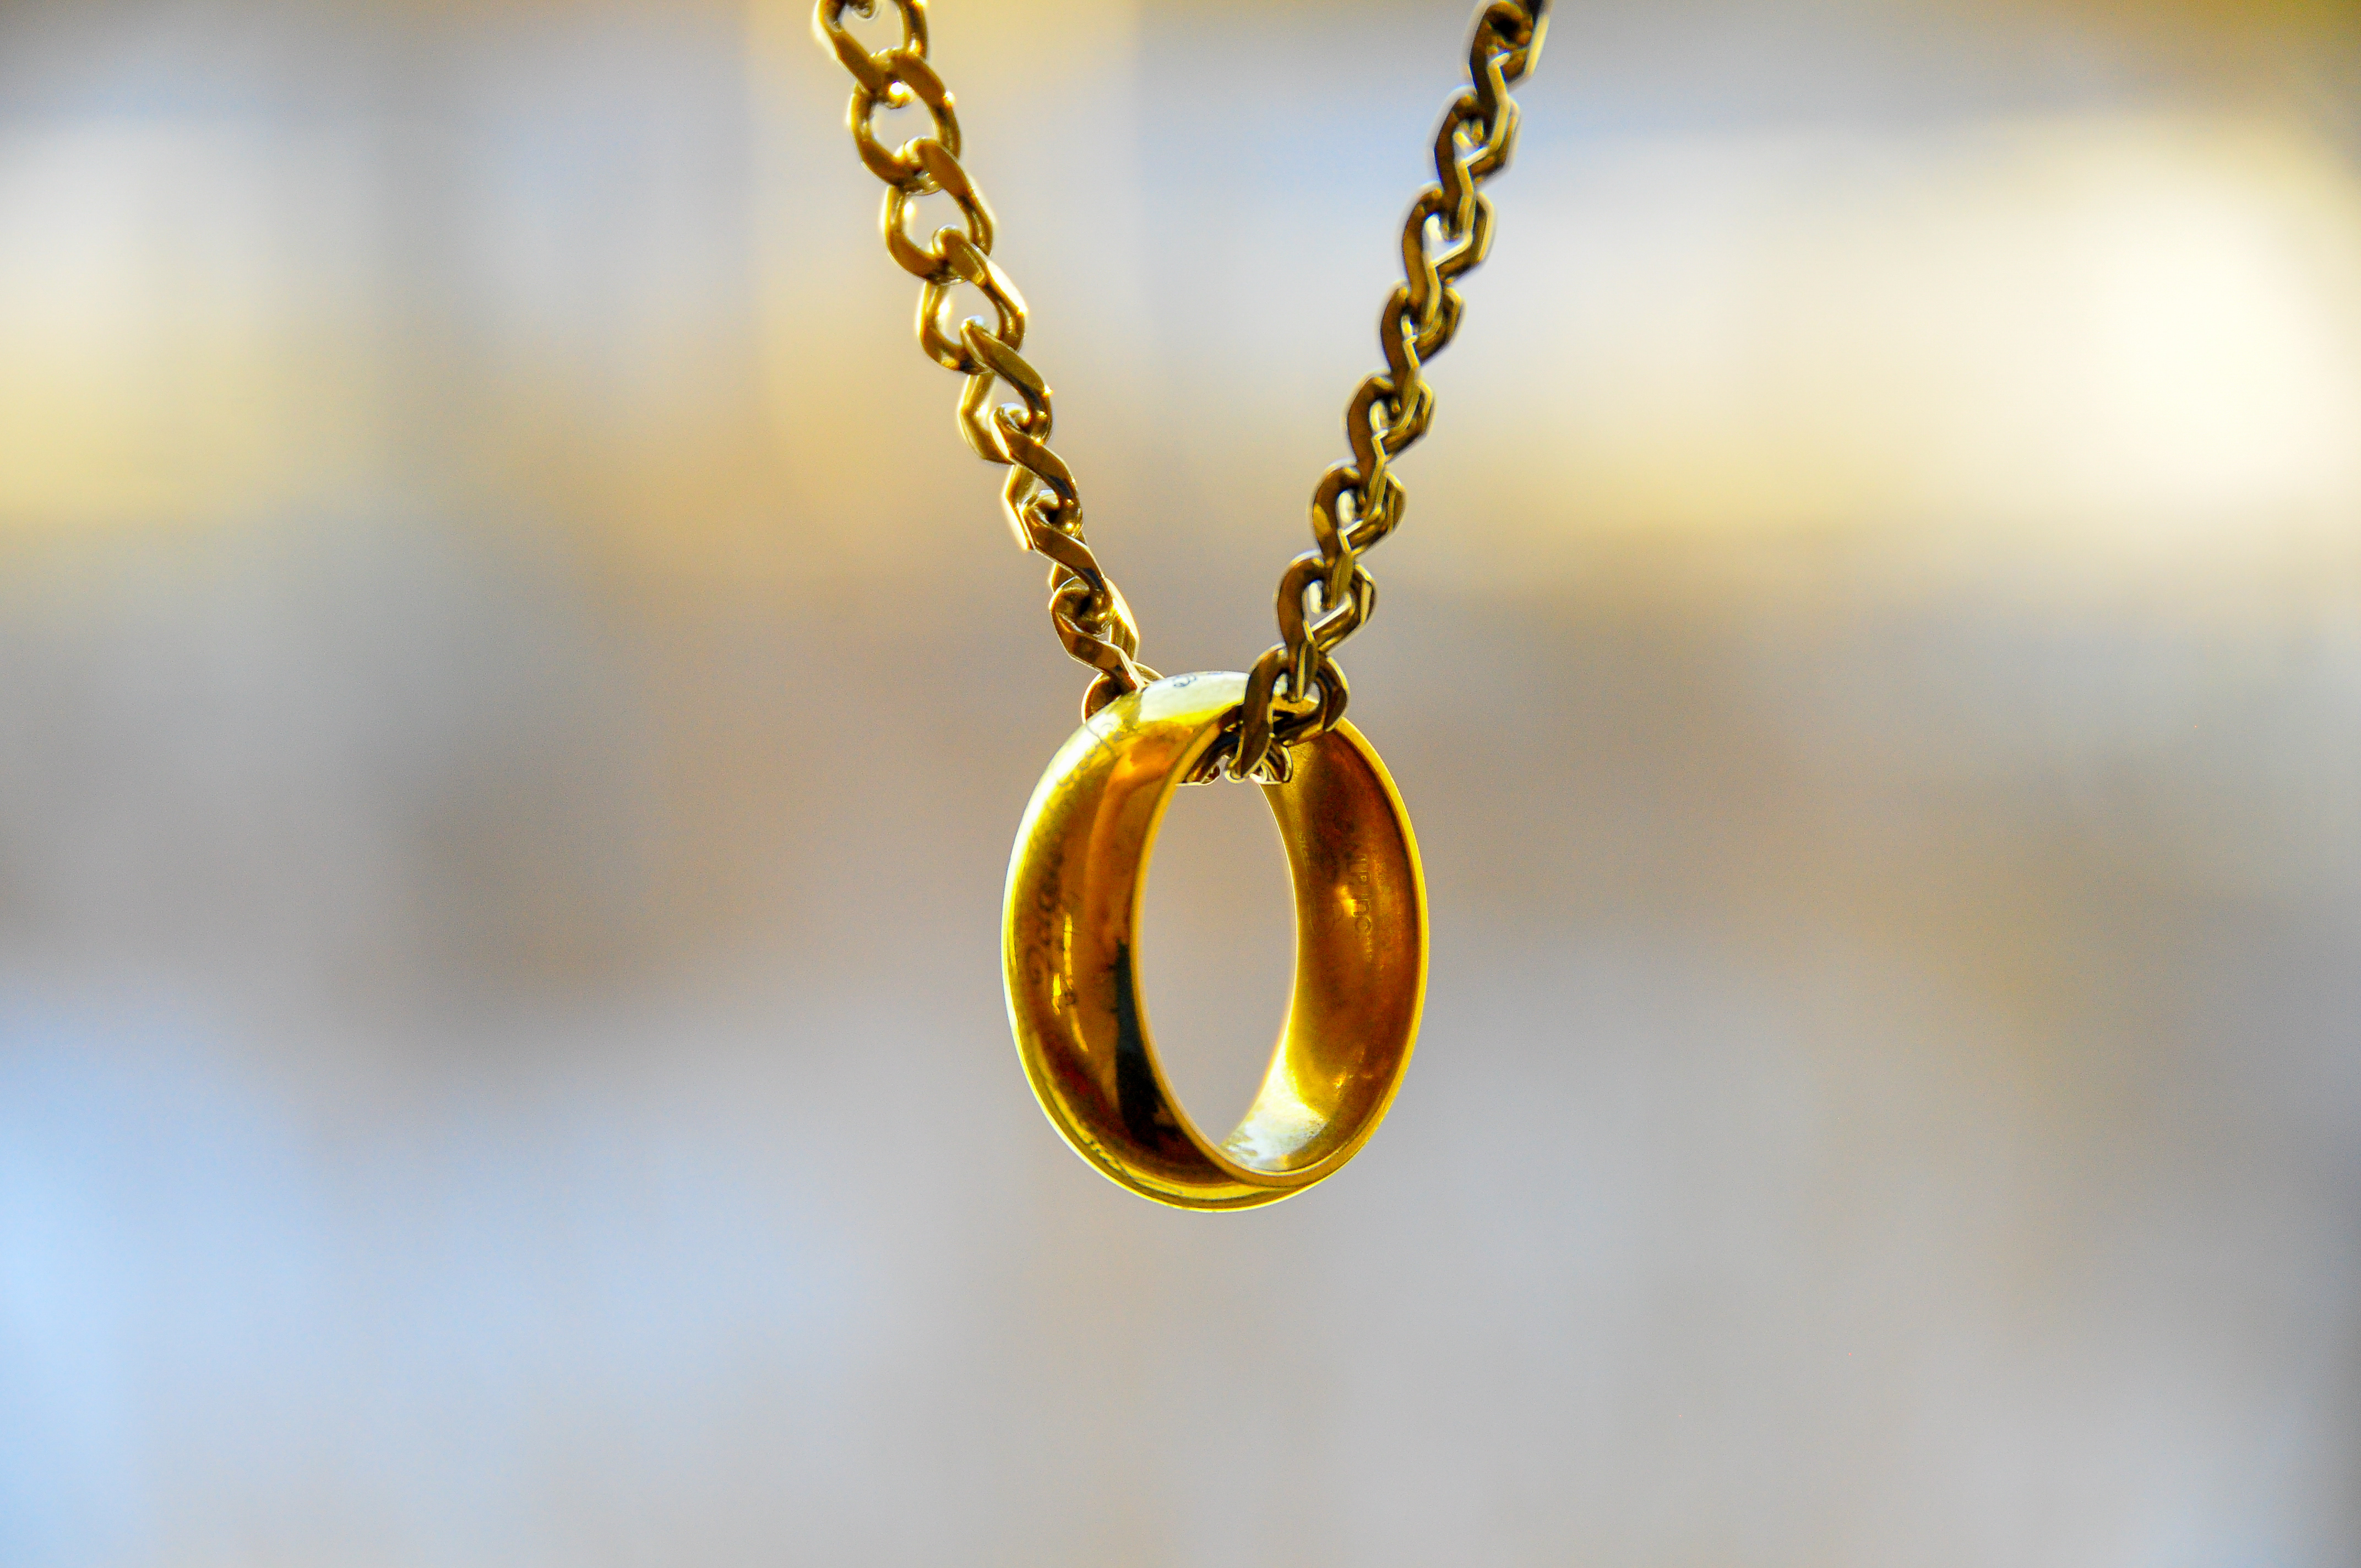 A shiny golden ring on a matching chain | Source: Shutterstock